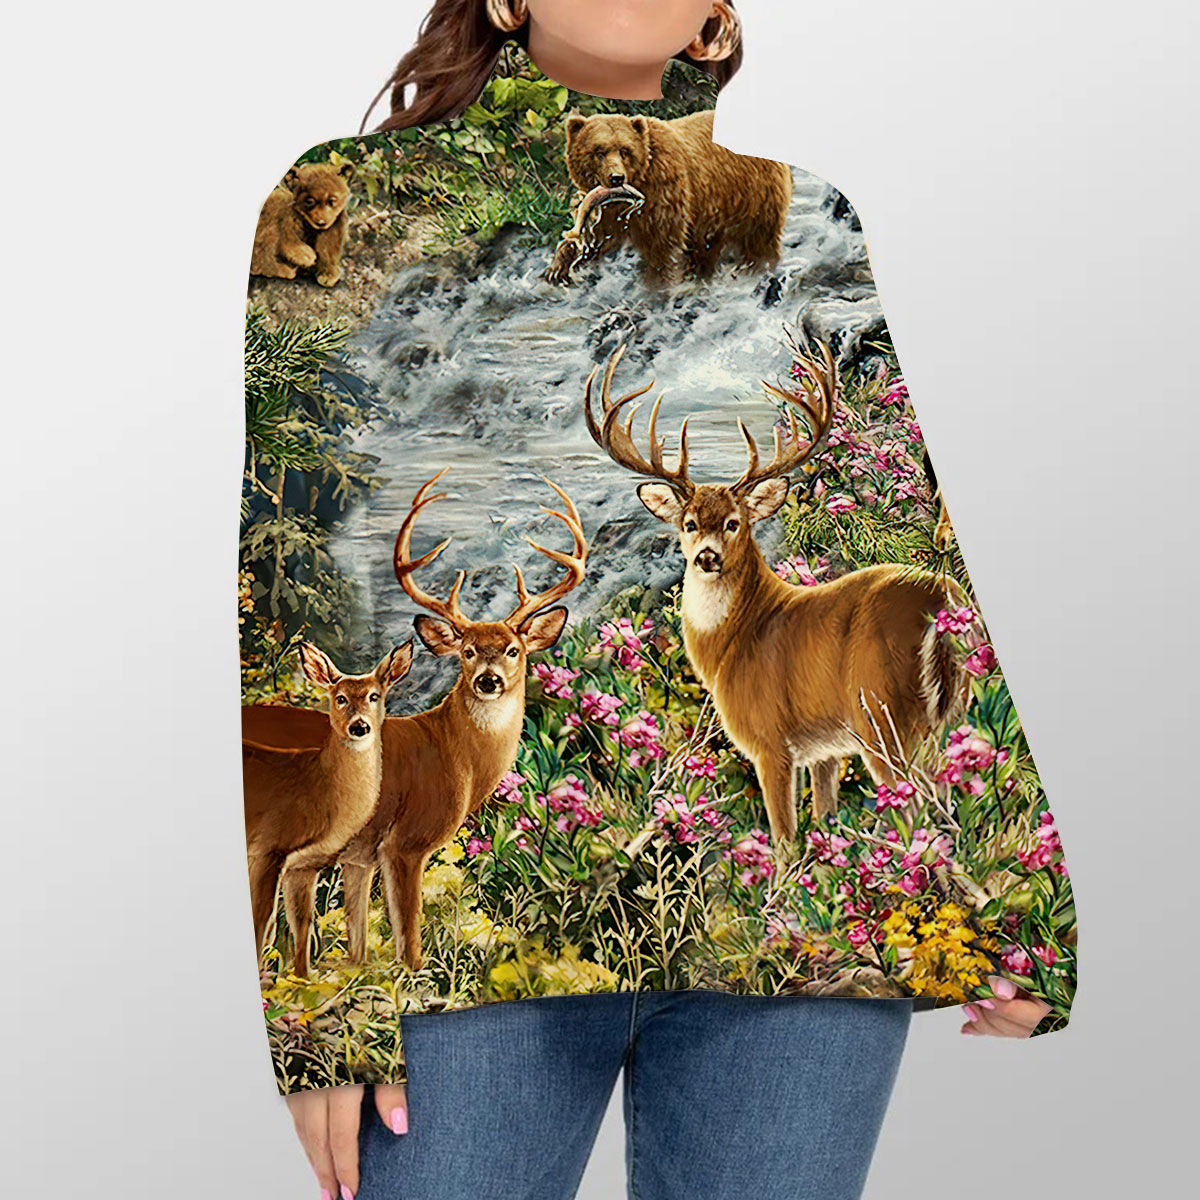 Deer and Bear Forest Hunting Turtleneck Sweater_1_2.1